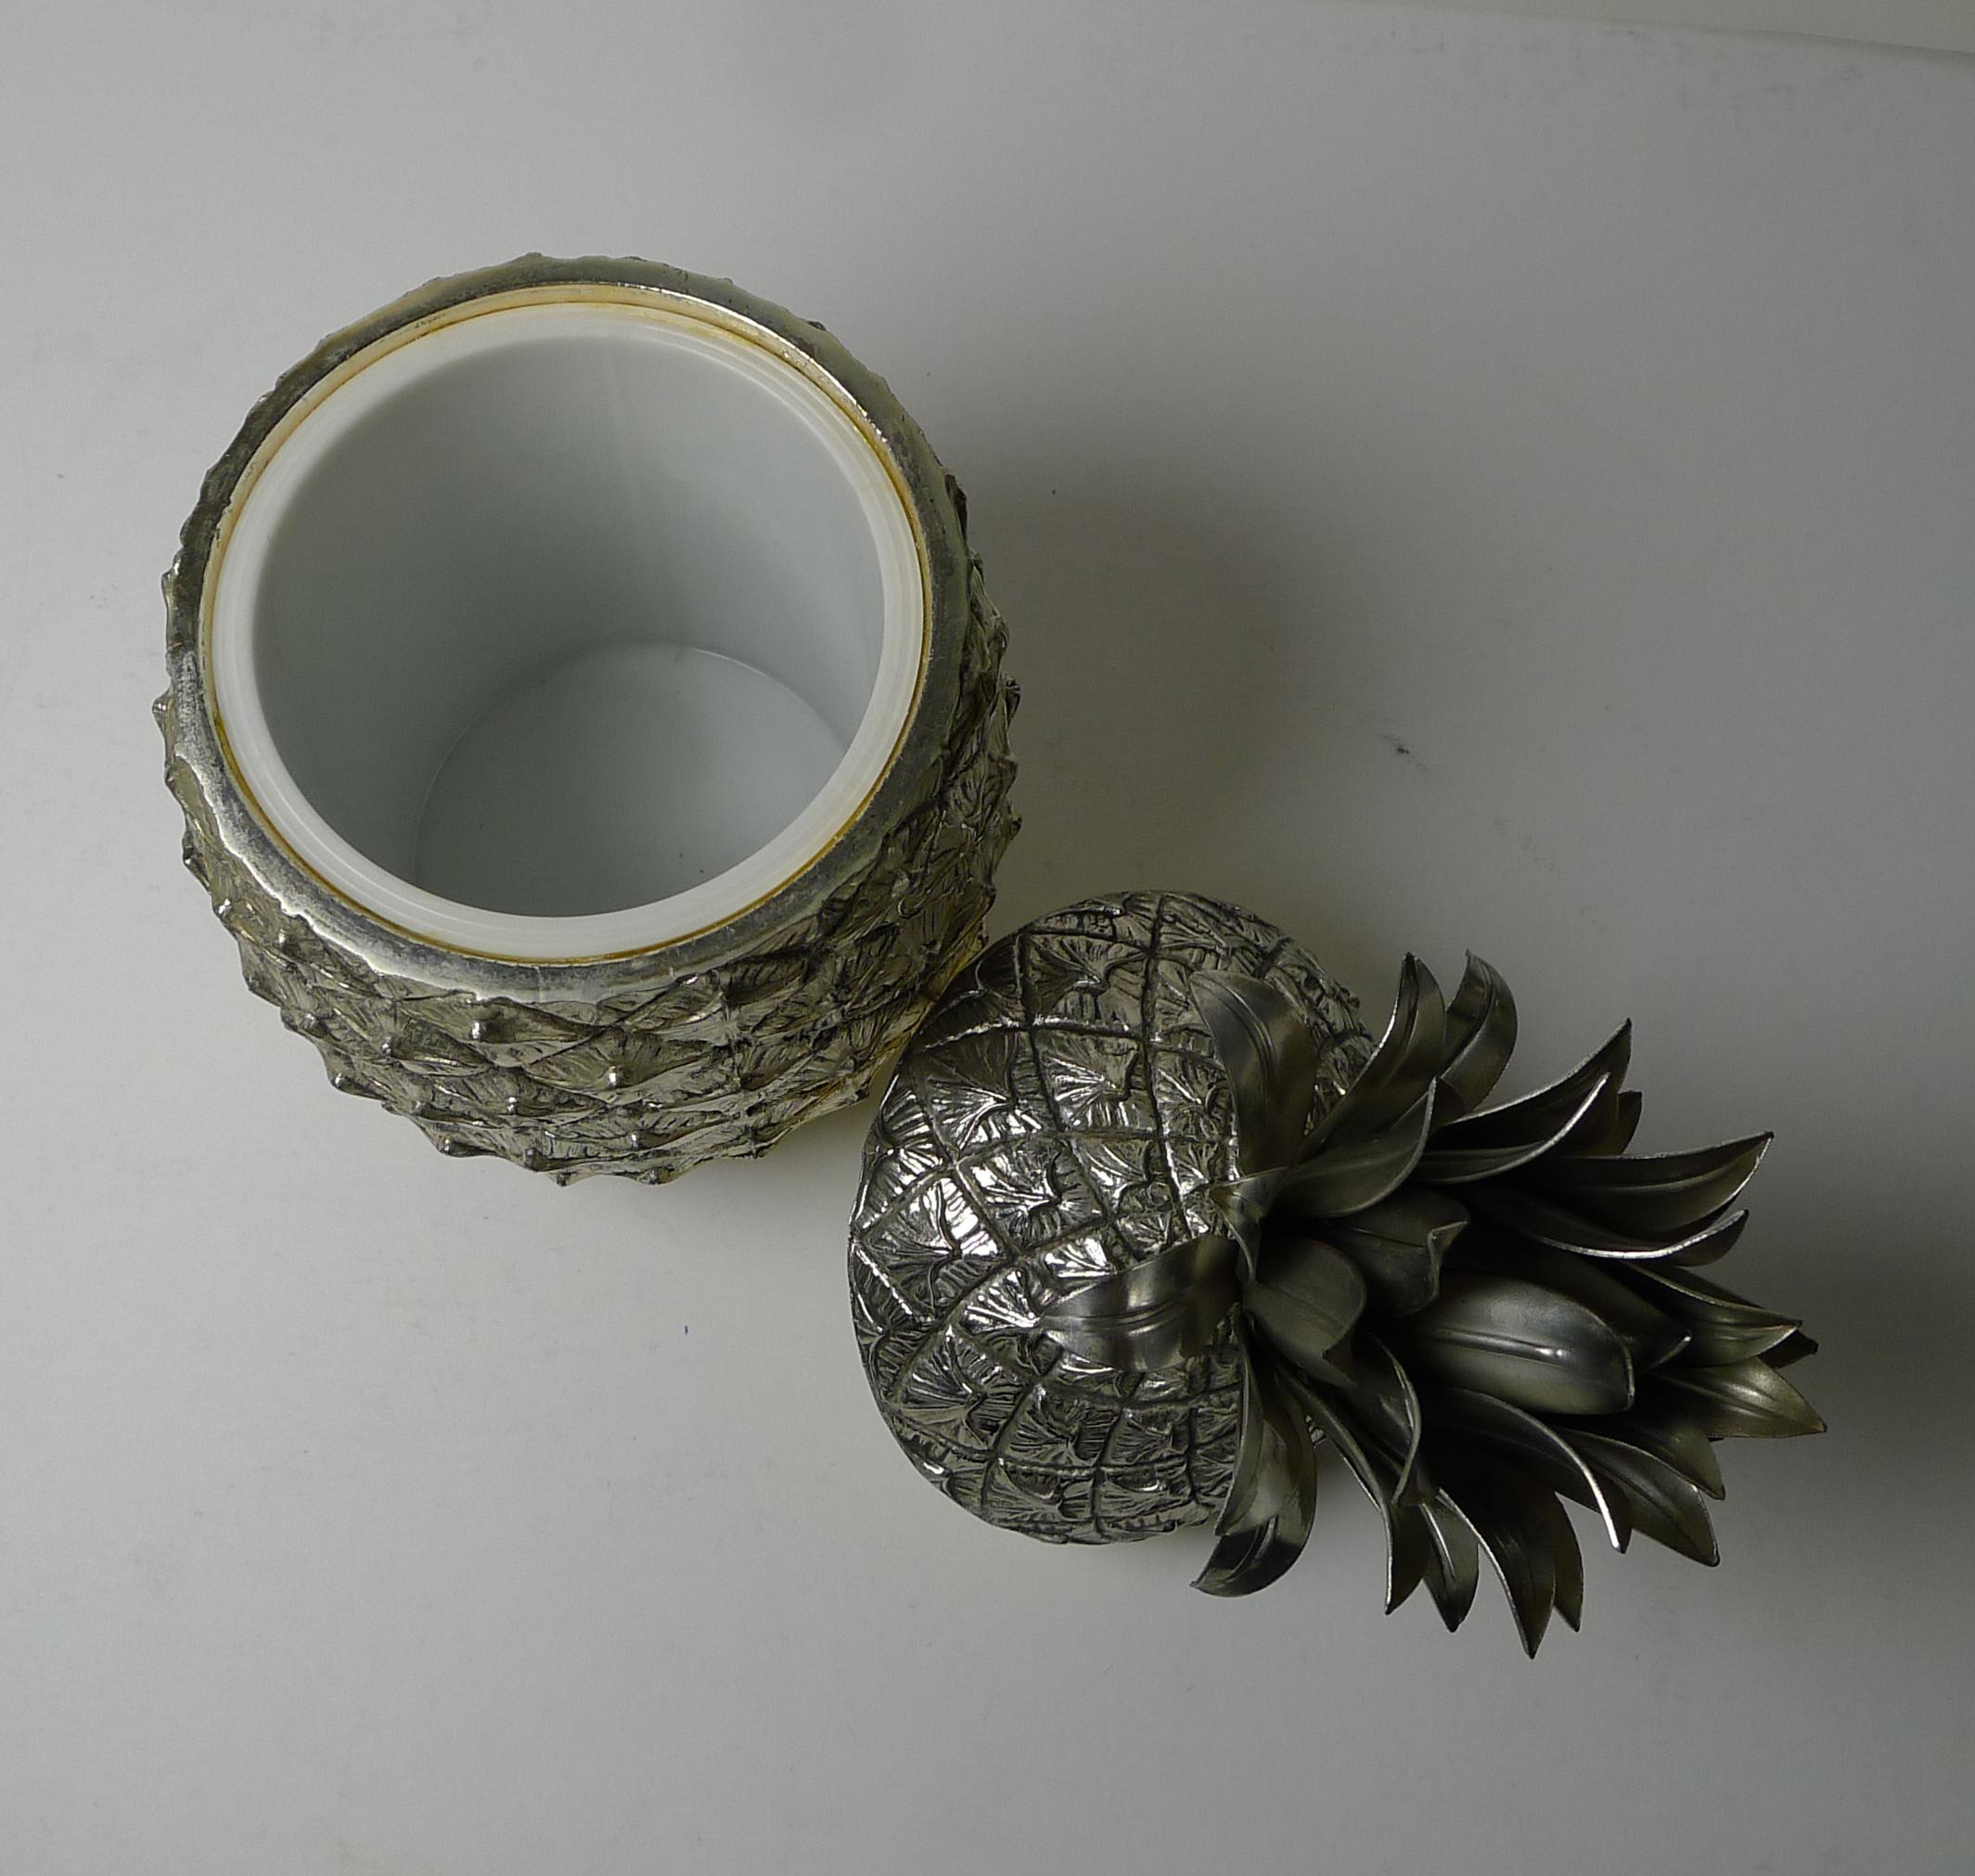 Silver Plate Novelty Italian Pineapple Ice Bucket by Mauro Manetti, Florence C.1960/1970